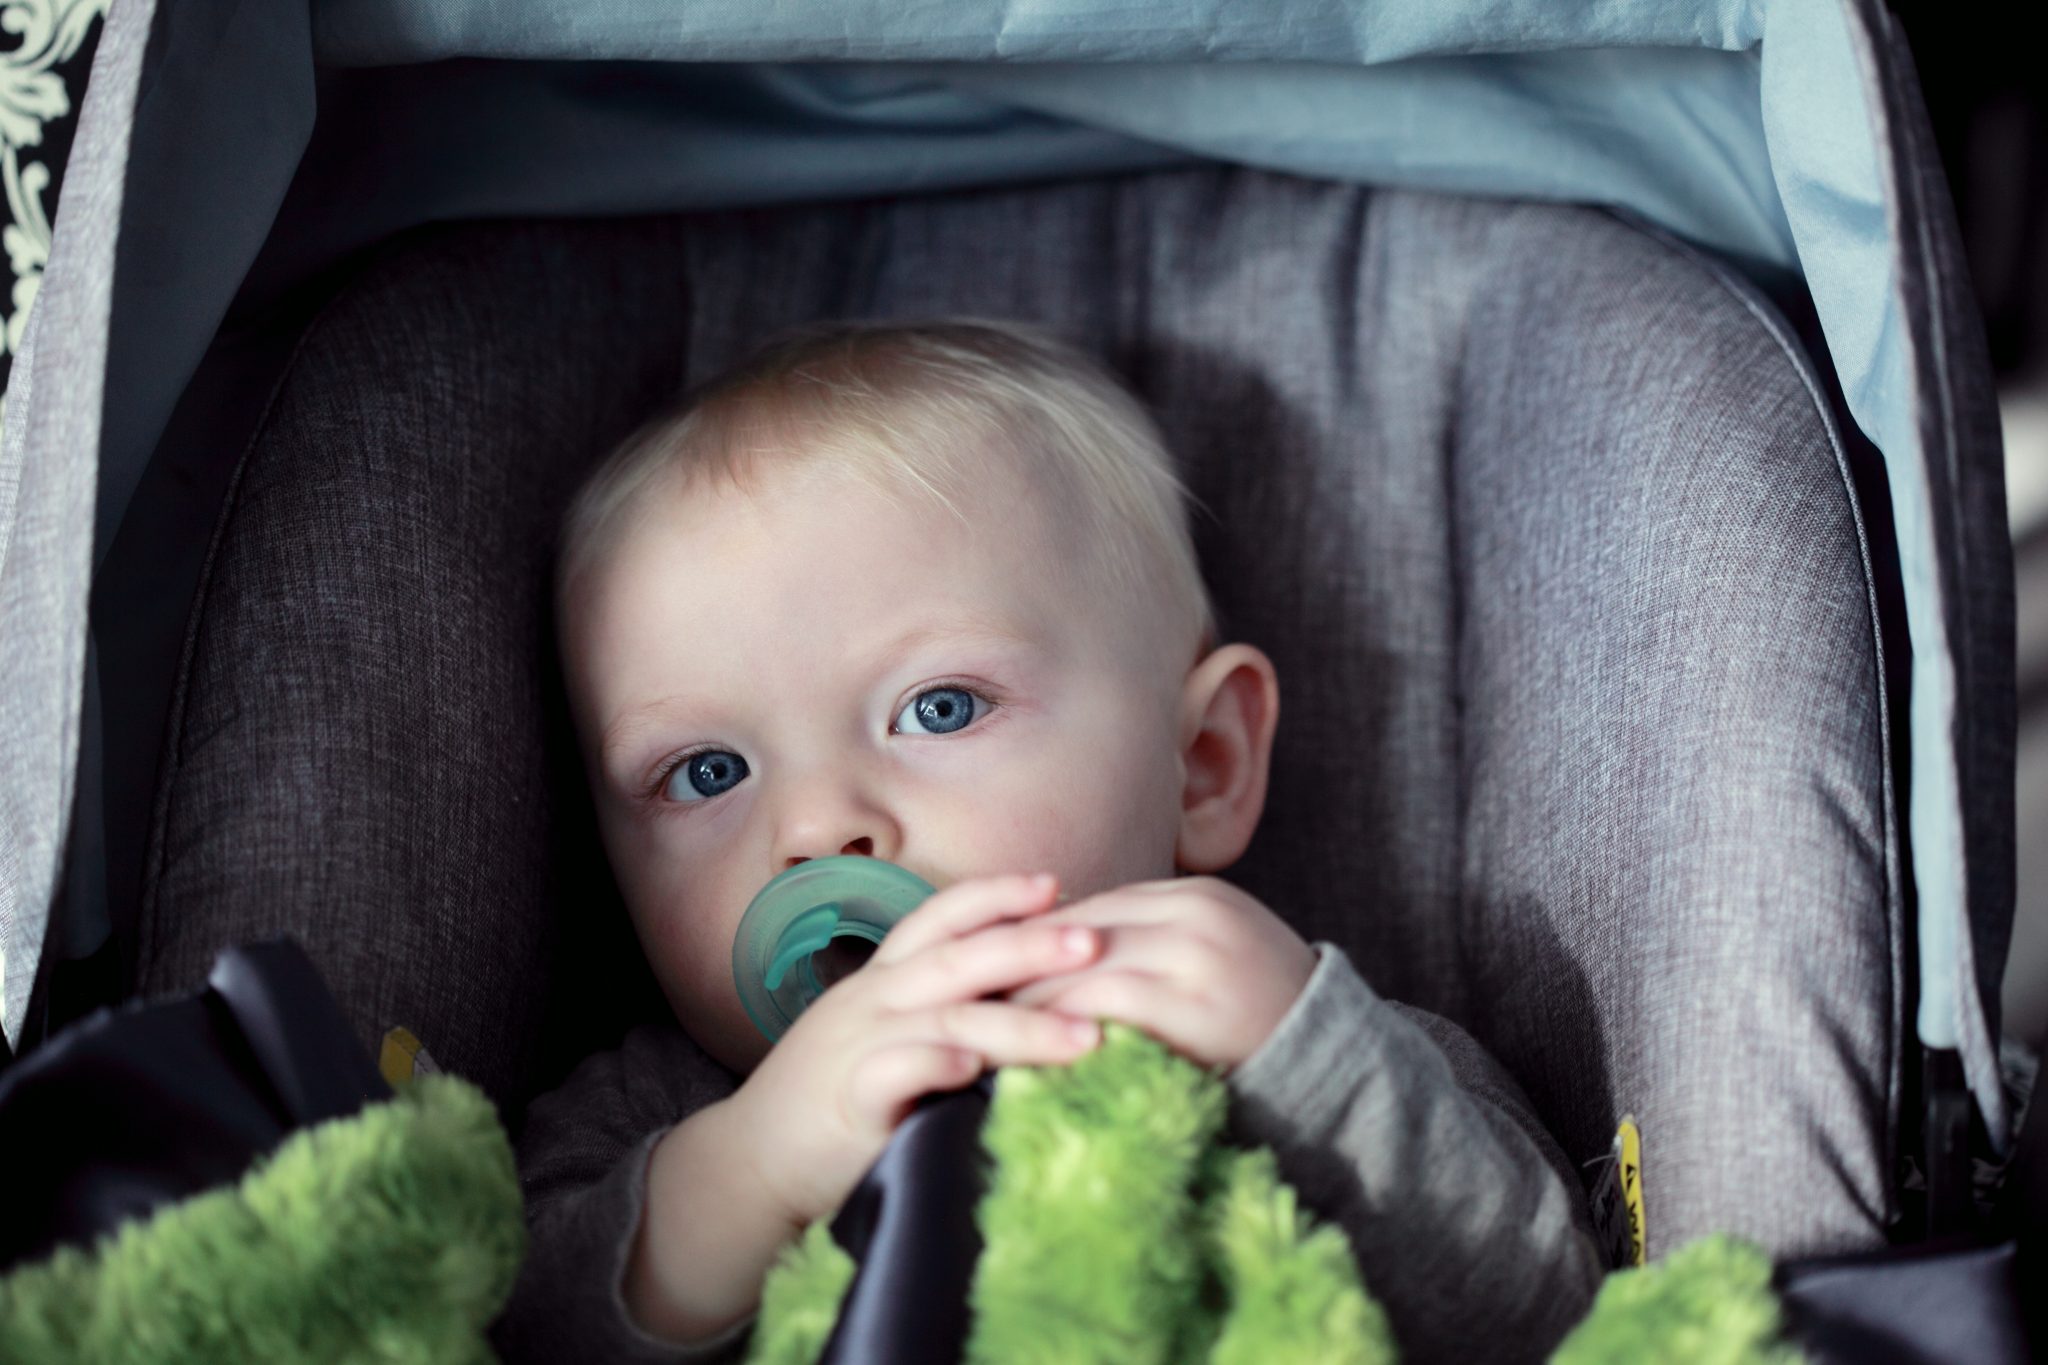 My Baby Hates The Car Seat - Dealing with Car Seat Crying - INVIDYO BLOG